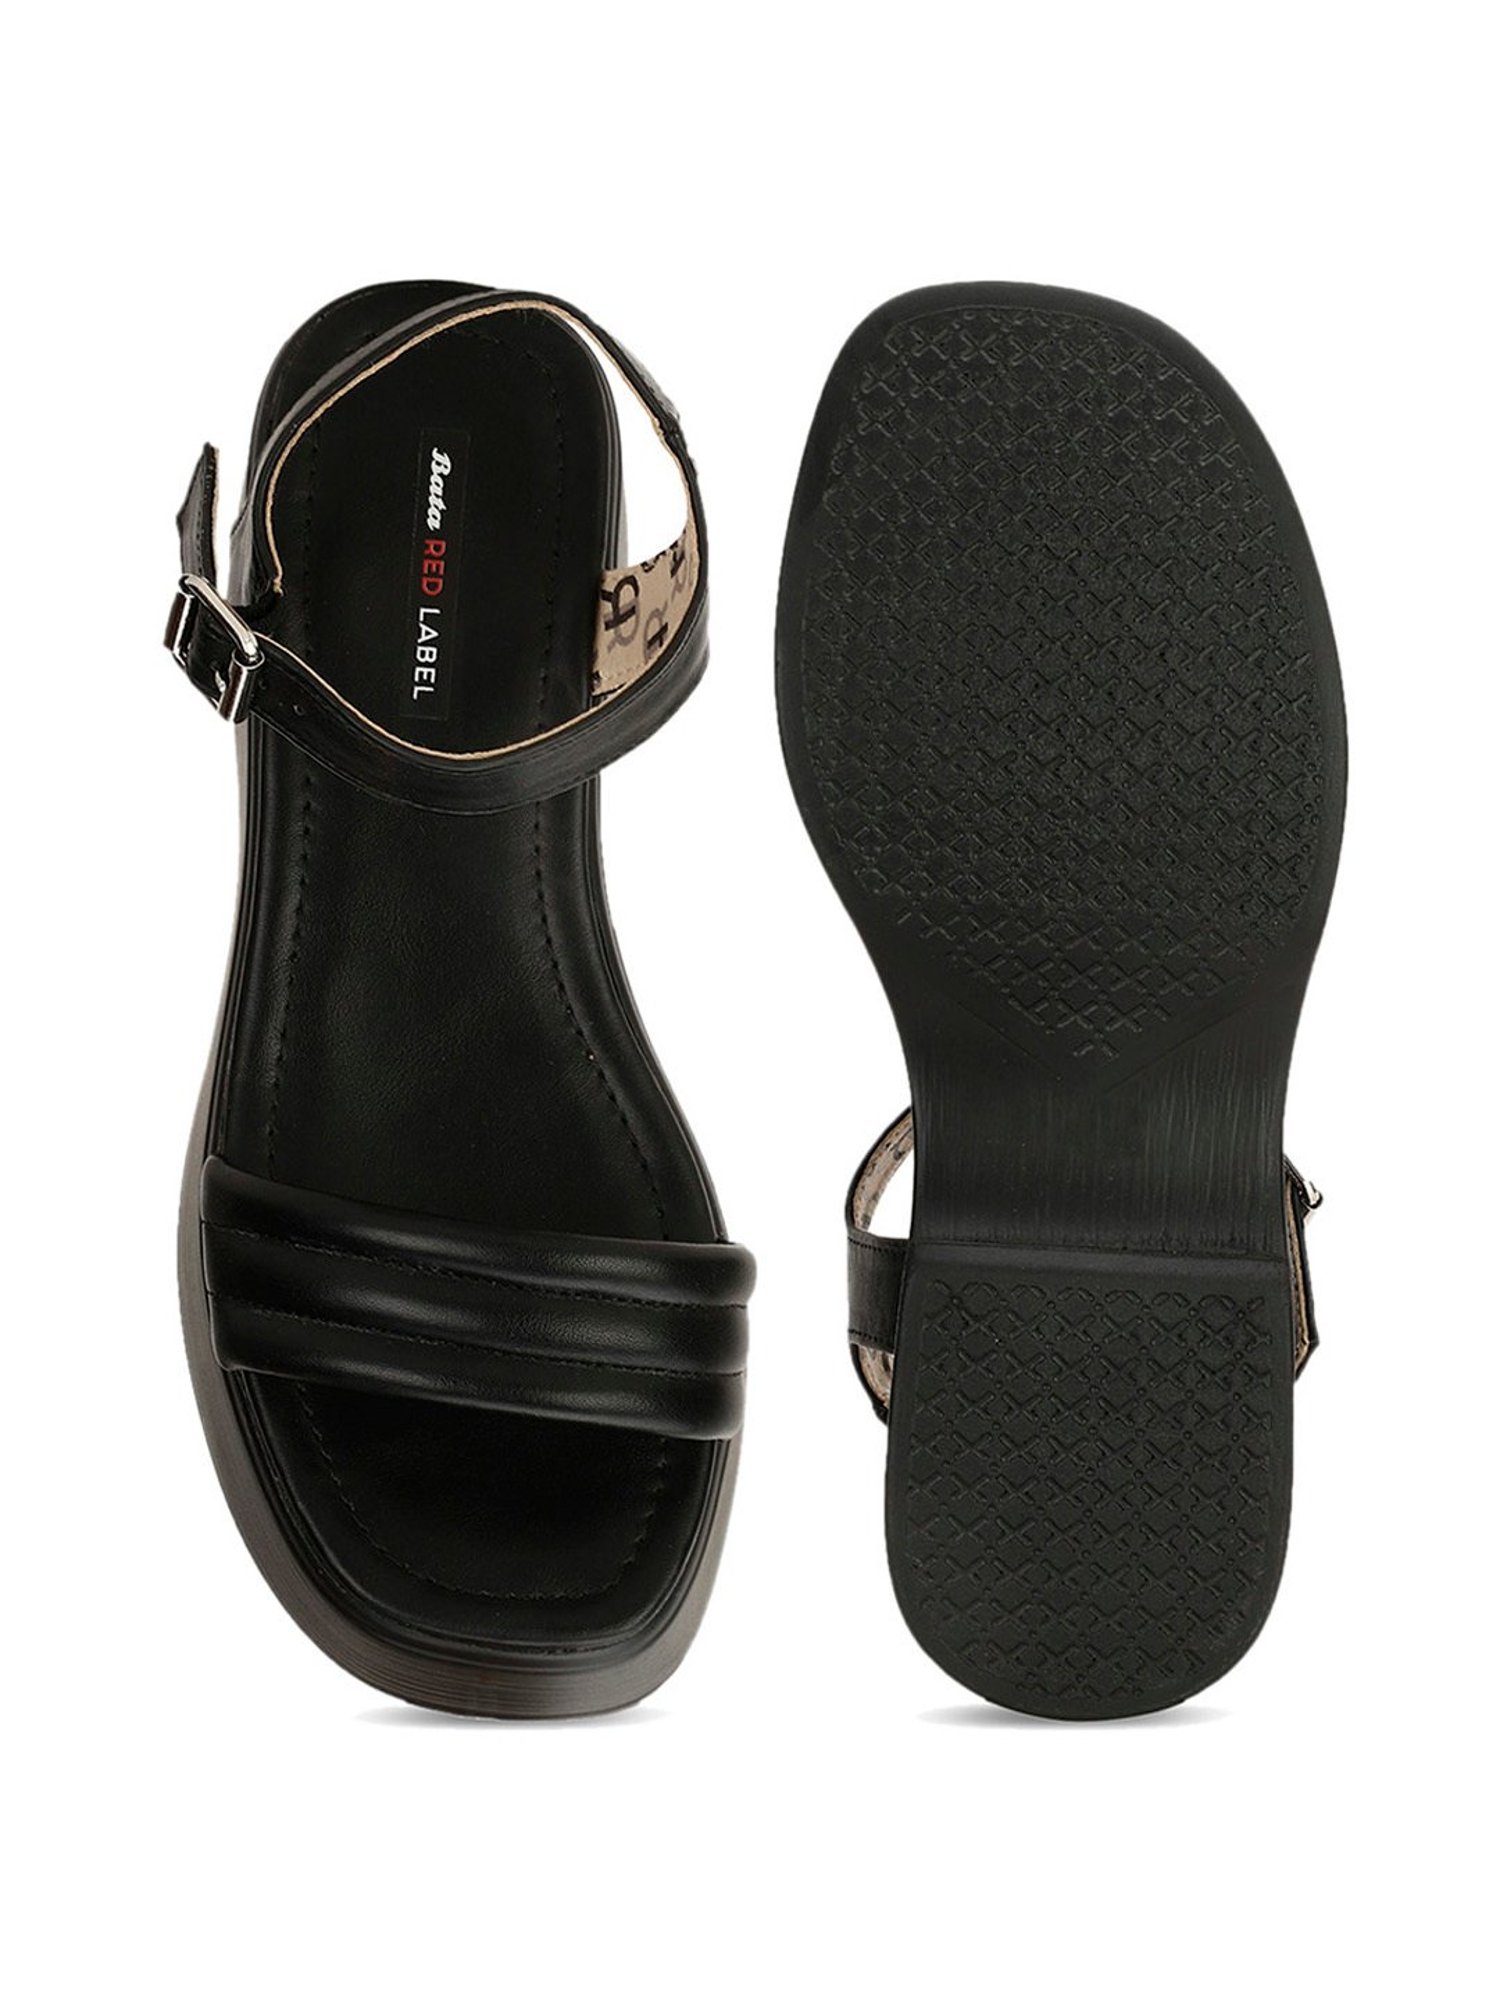 Bata Red Label - Slippers for Women